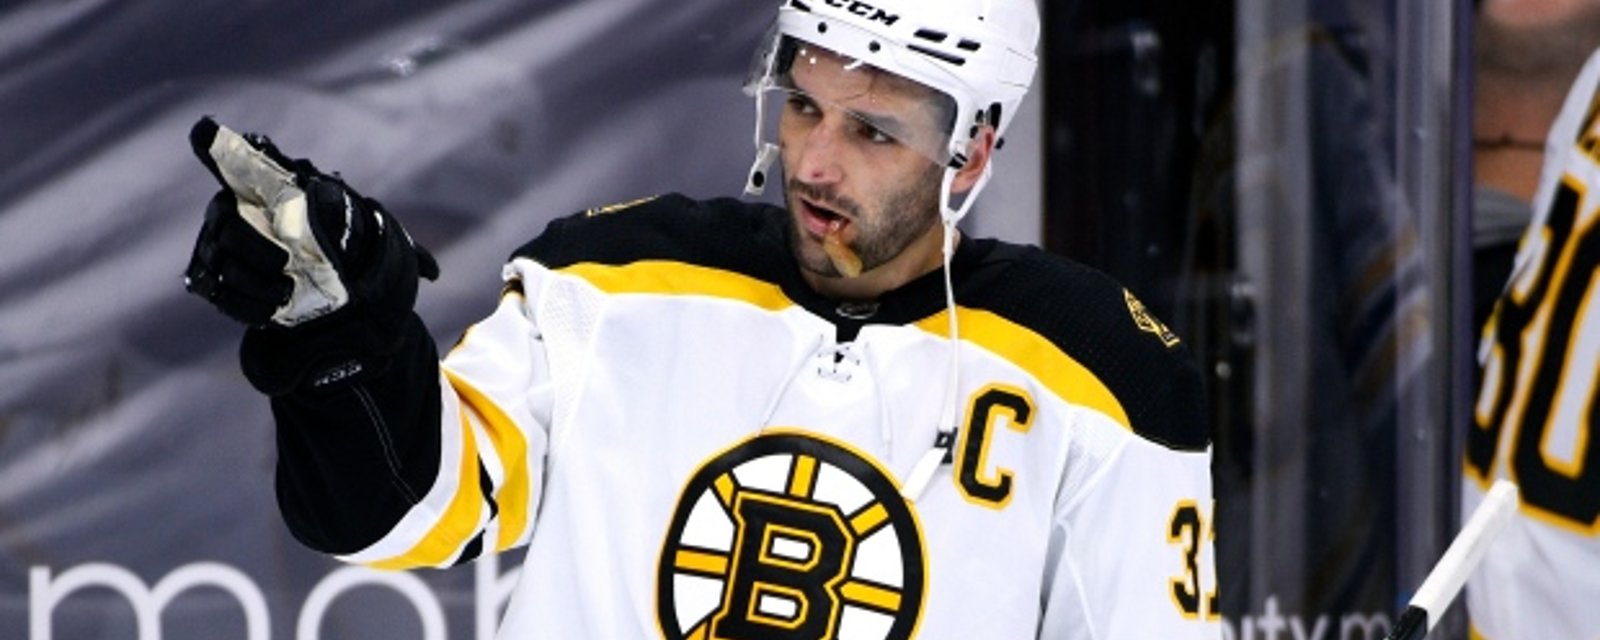 Life-altering news for Patrice Bergeron!